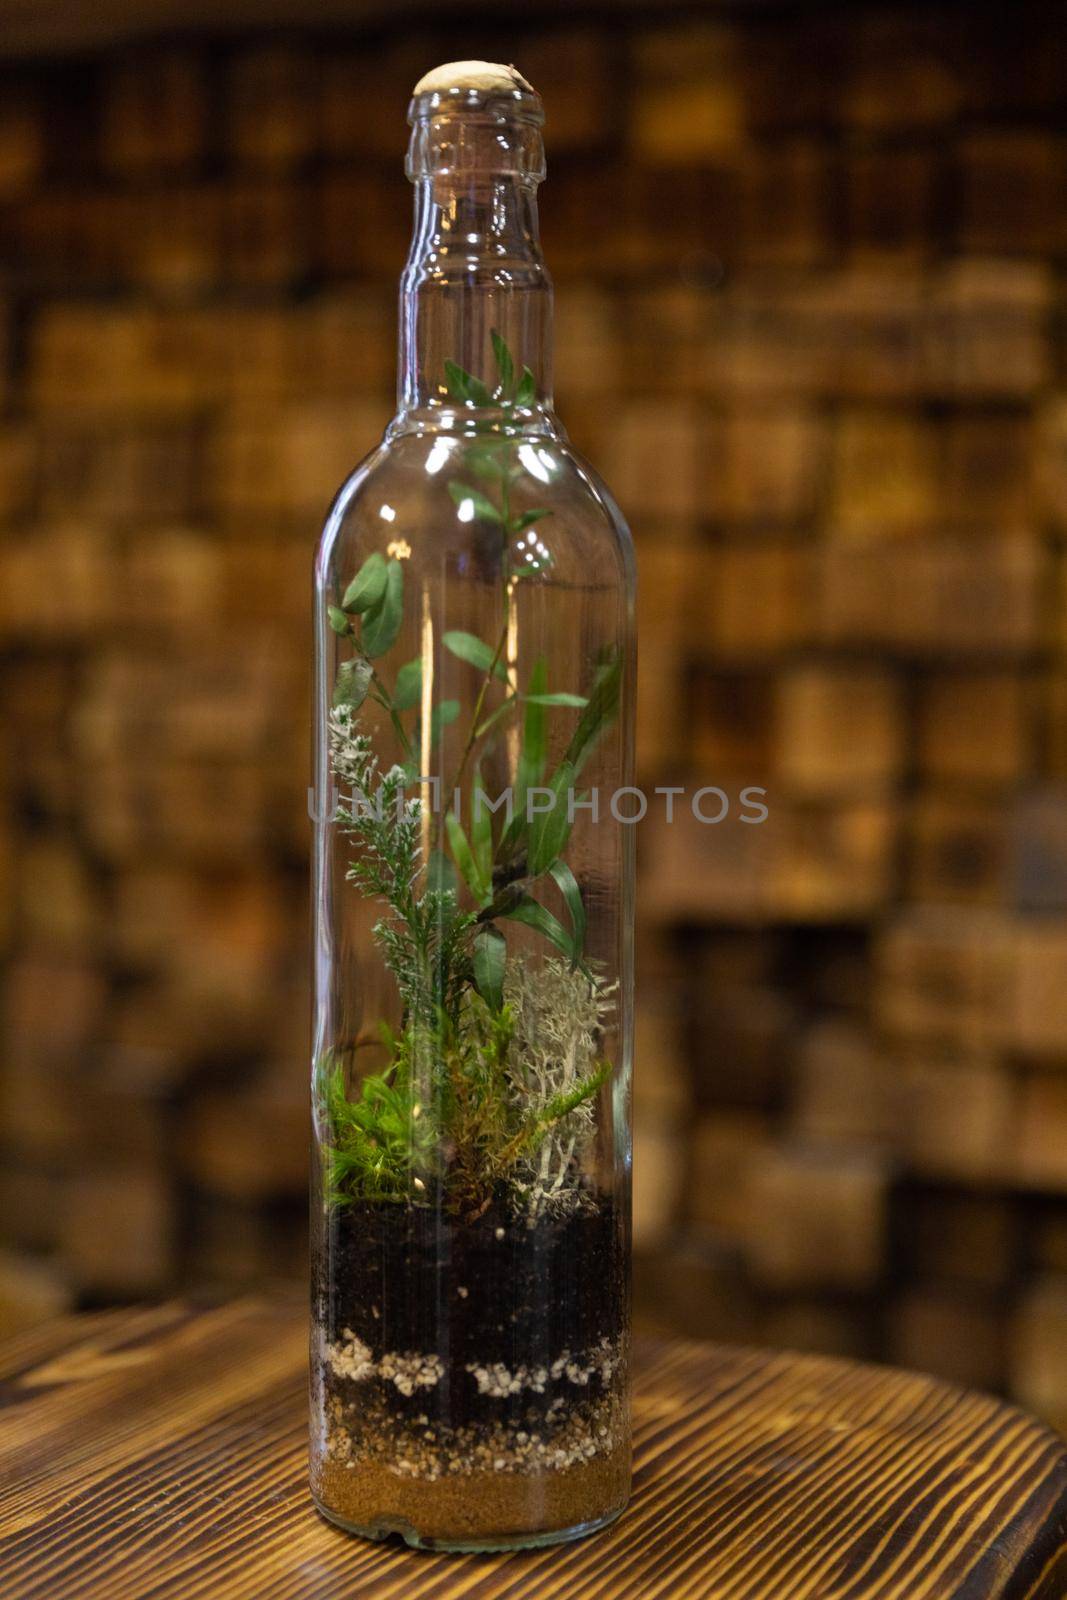 flowers and moss that grow inside the bottle.